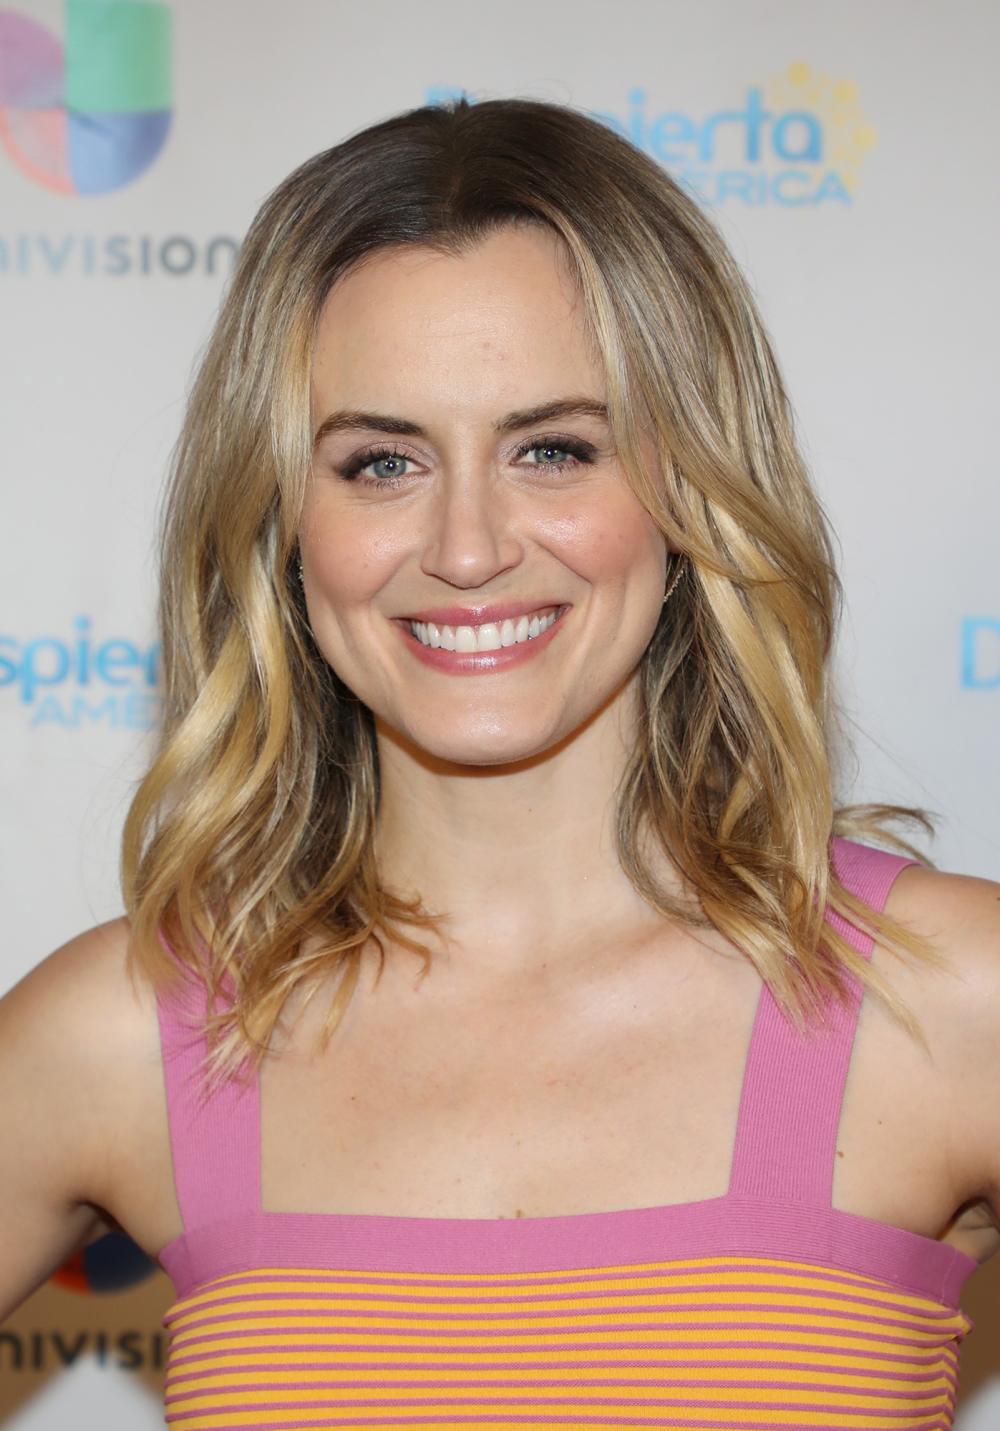 Taylor Schilling: 25 Things You Don't Know About Me!